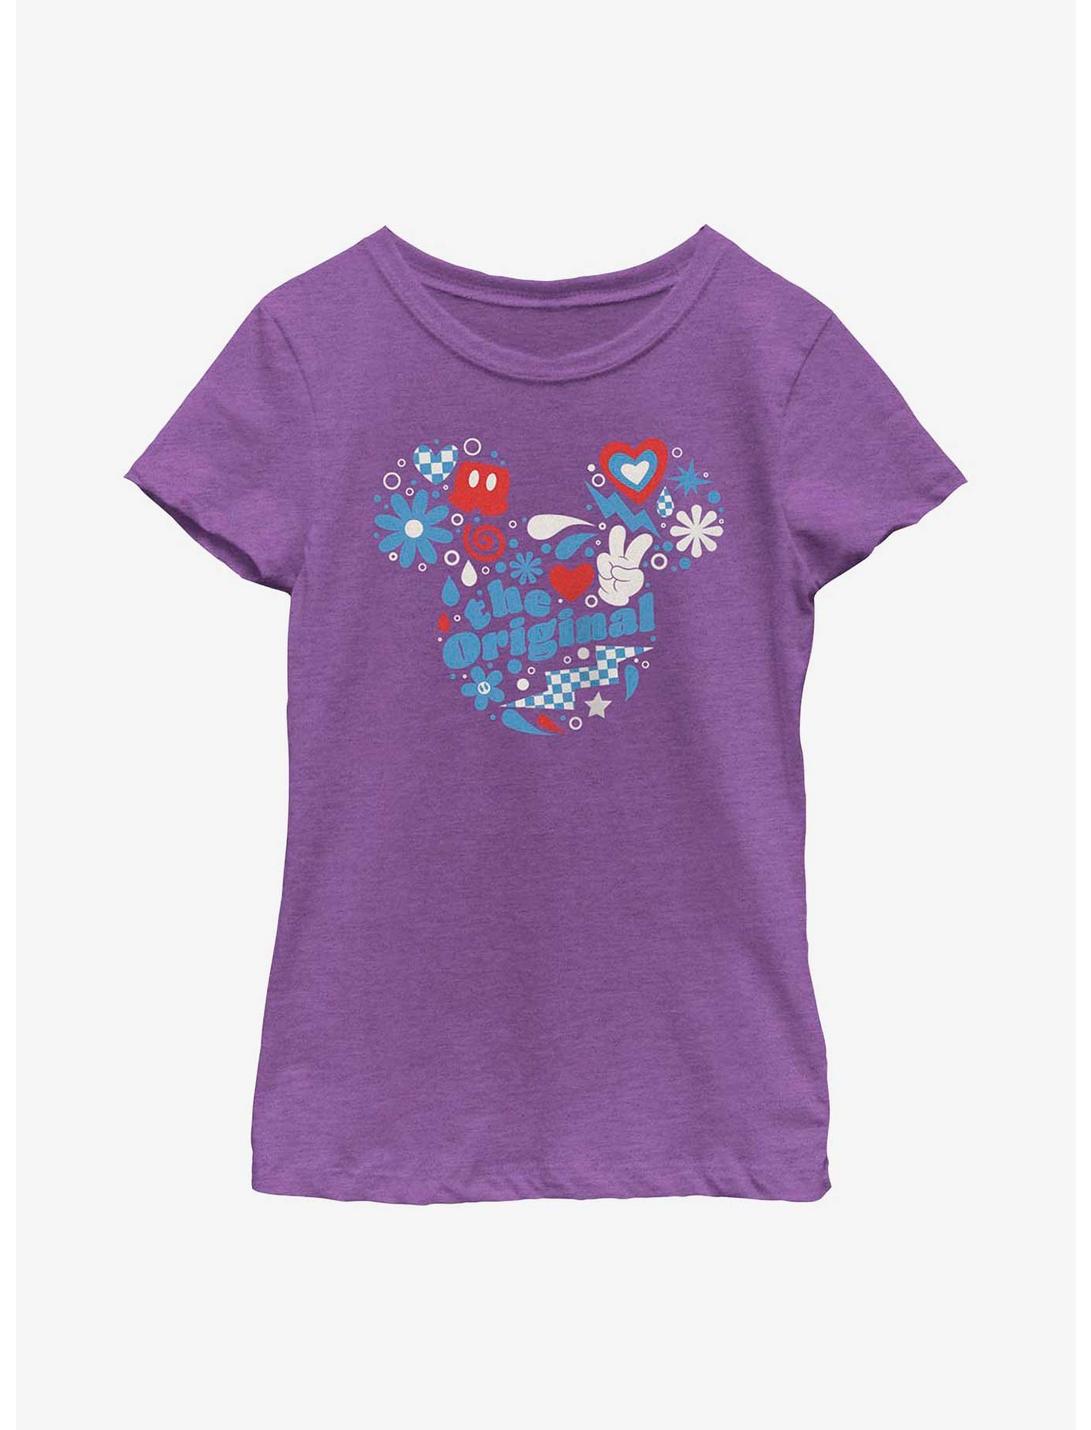 Disney Mickey Mouse The Original Mouse Ears Youth Girls T-Shirt, PURPLE BERRY, hi-res